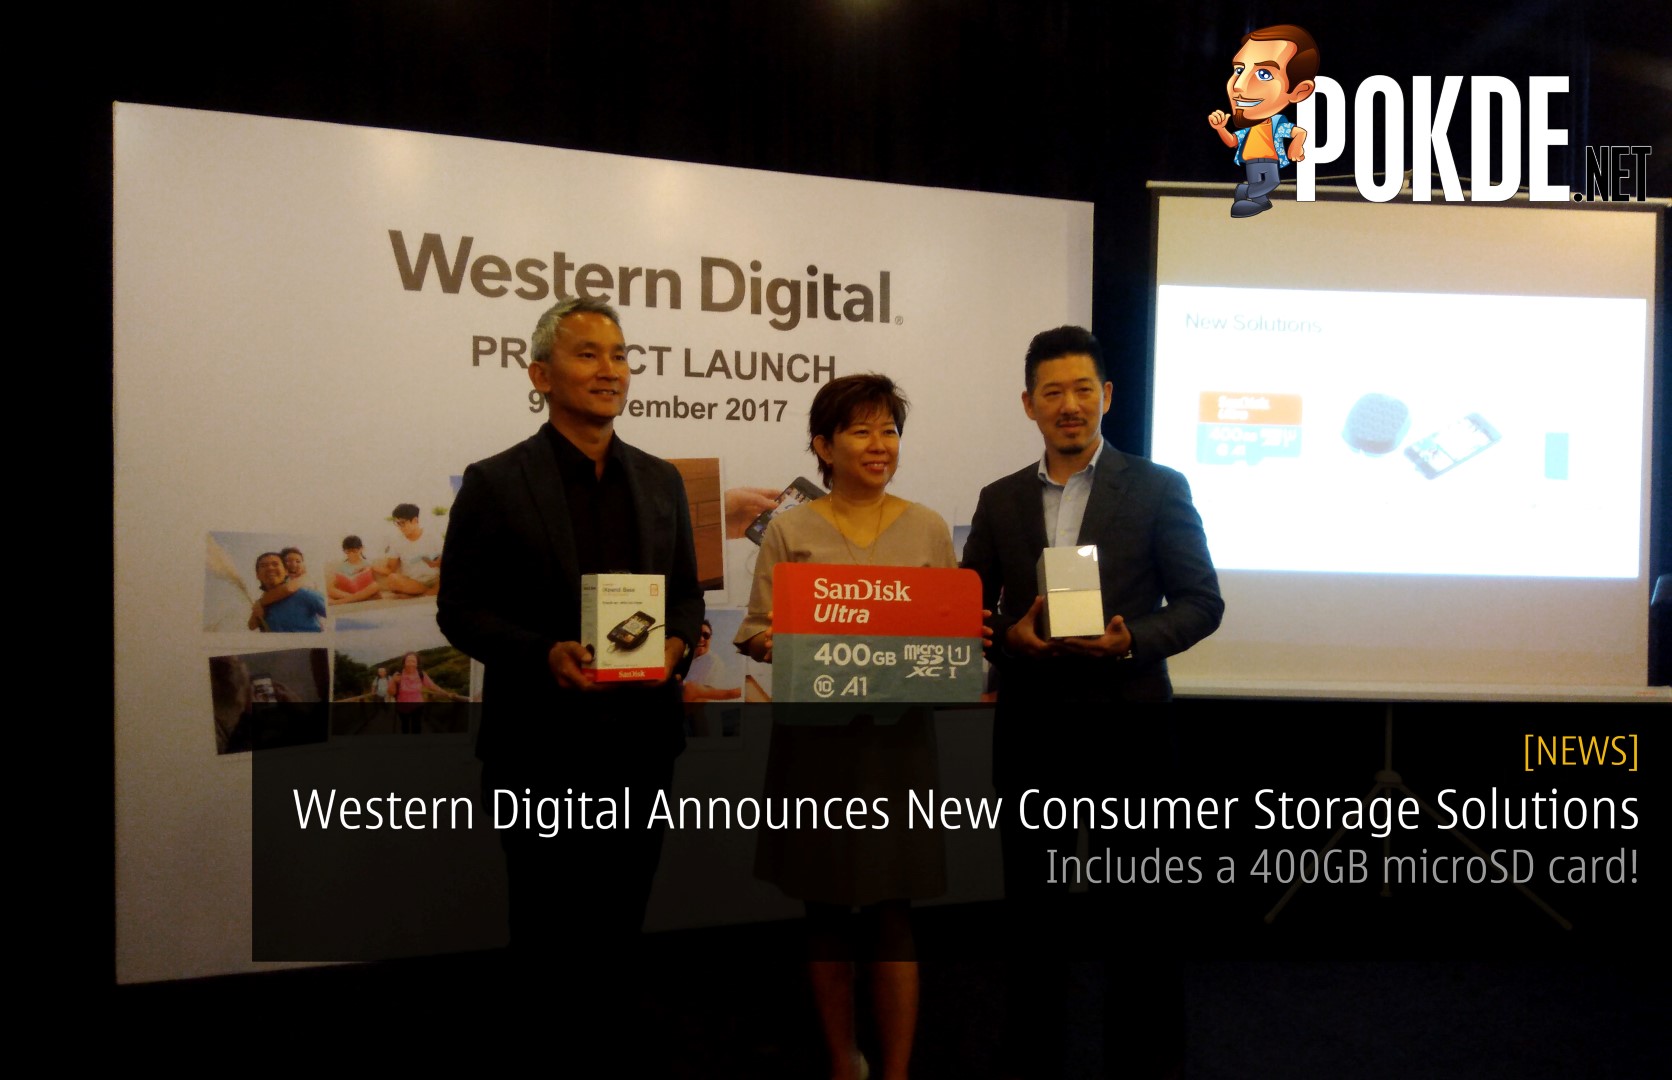 Western Digital Announces New Consumer Storage Solutions - Includes a 400GB microSD card! 25